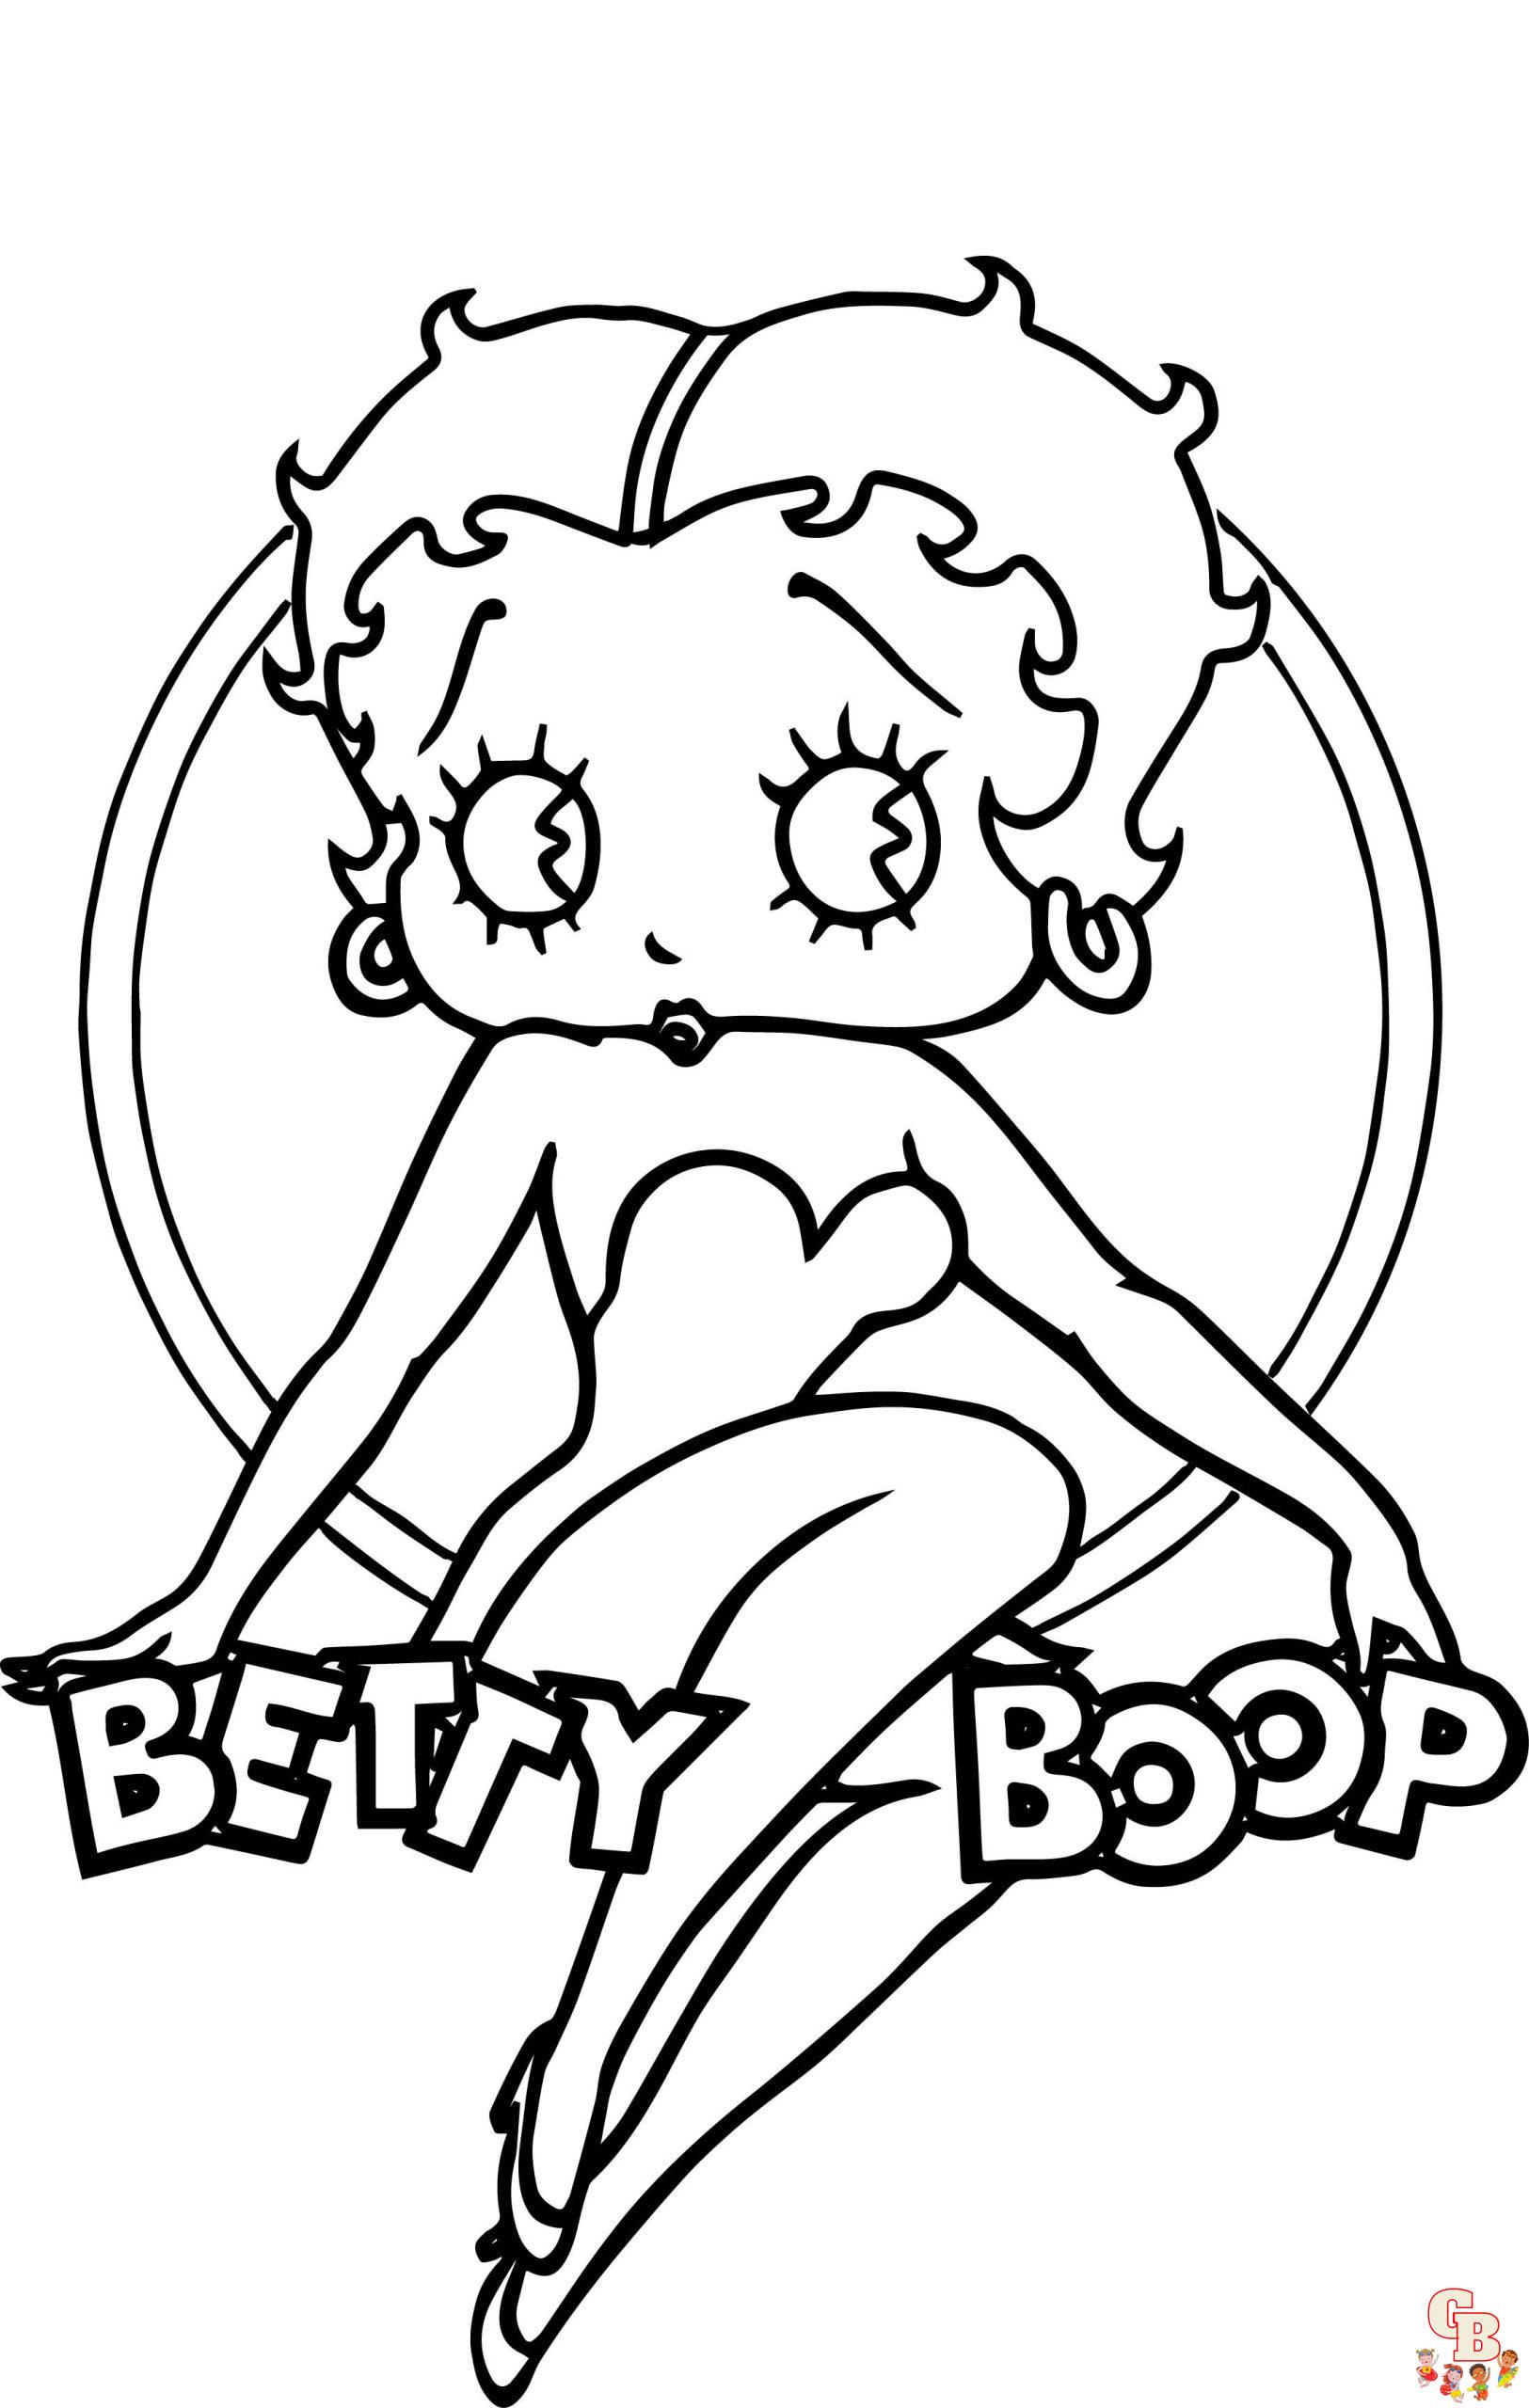 Free printable betty boop coloring pages